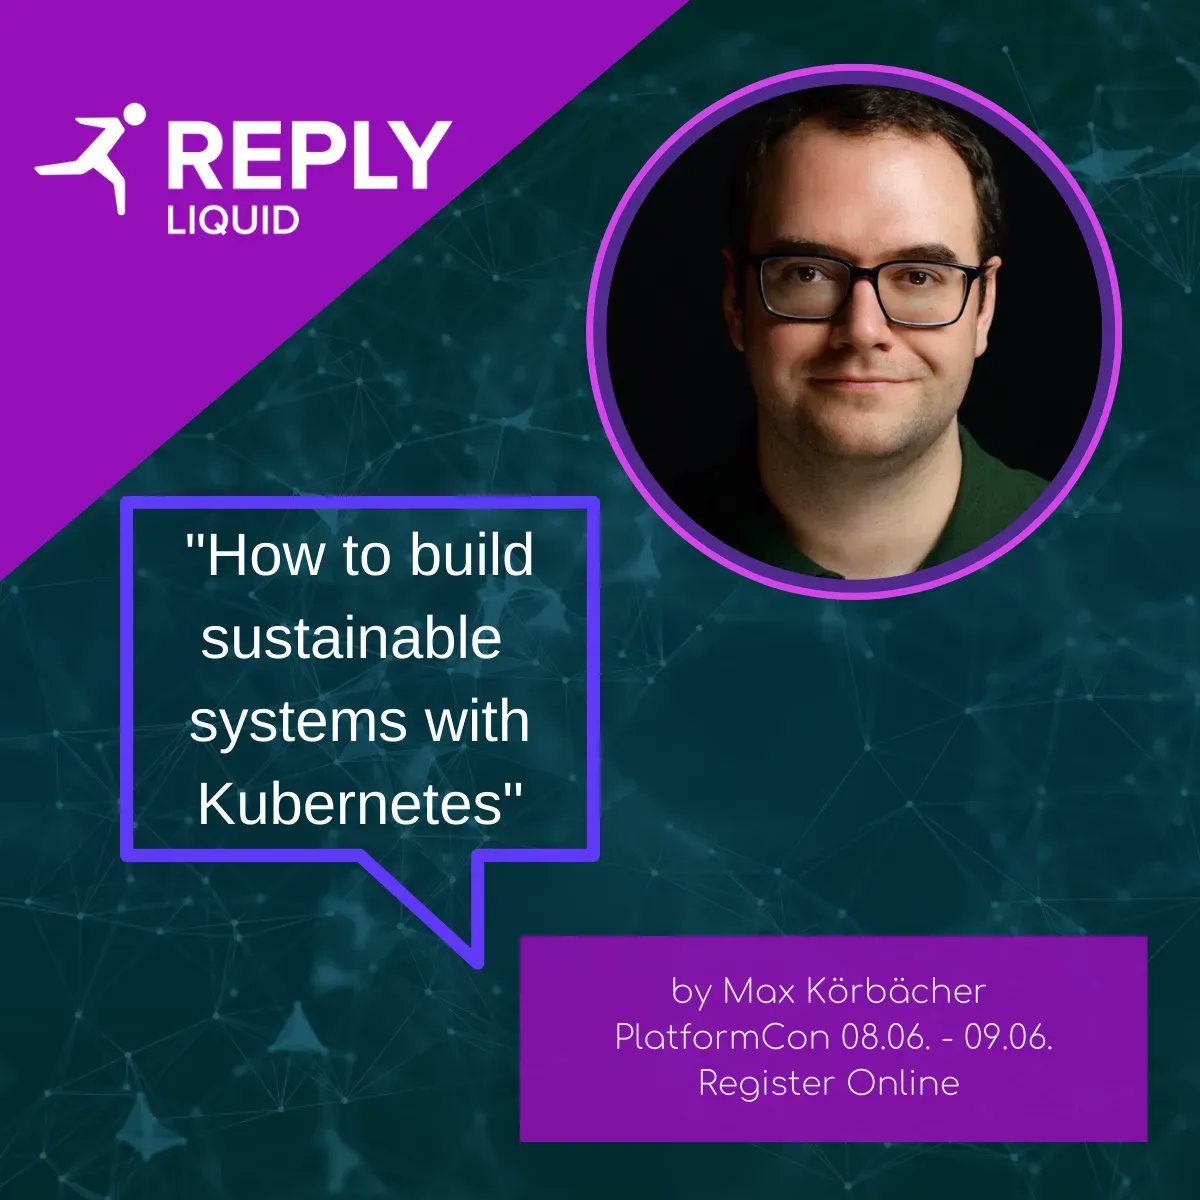 Learn to build sustainable Kubernetes systems with @mkoerbi.
Join his talk at PlatformCon by registering here: buff.ly/3WL0Y54
We are looking forward to see you.

#LiquidReply #K8S #platformengineering #Sustainability